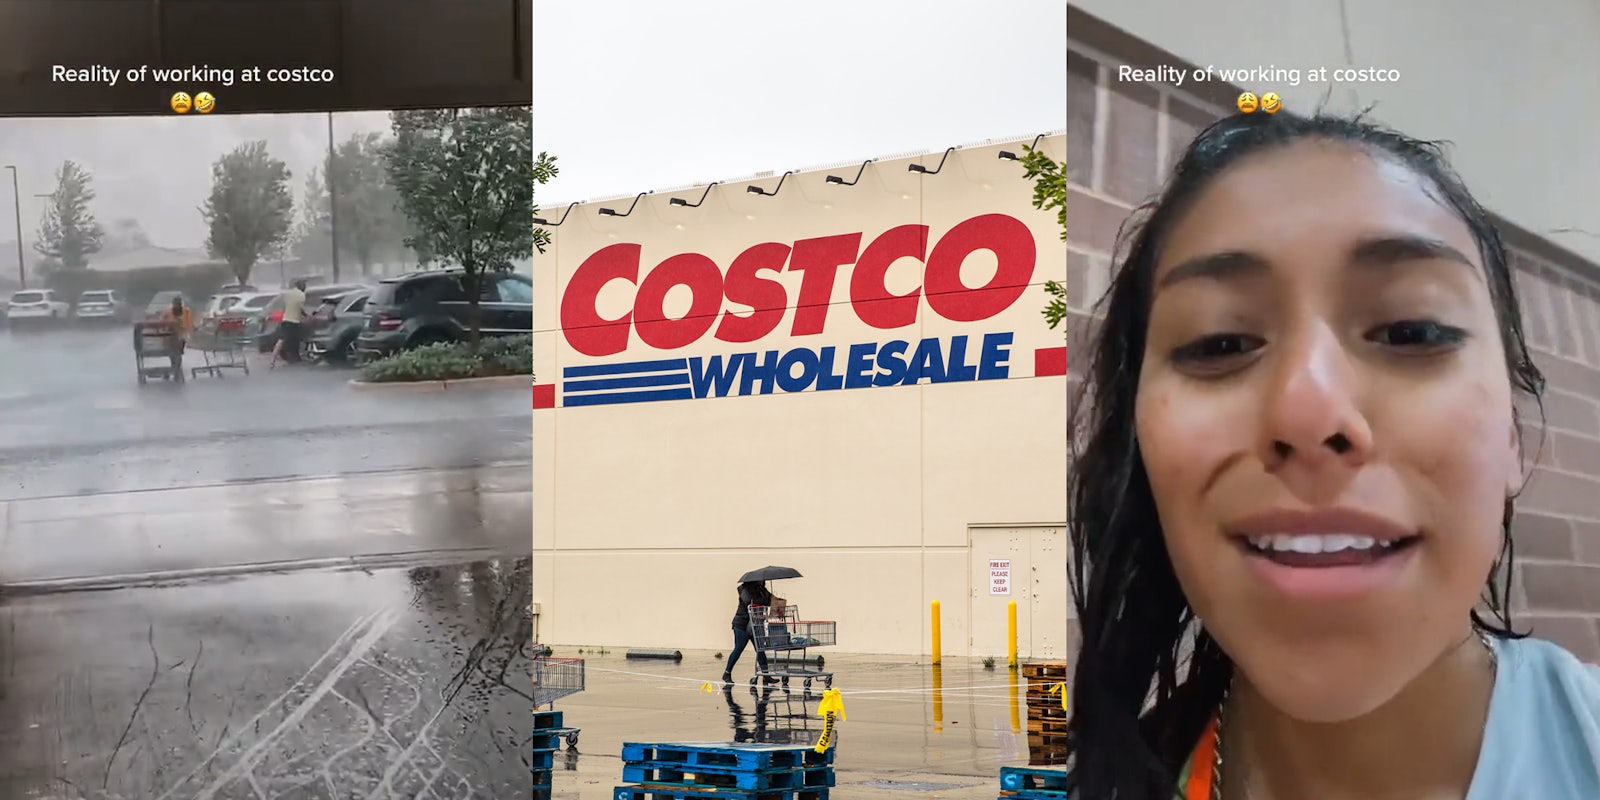 Costco parking lot during rainstorm with caption 'Reality of working at costco' (l) Costco building with sign with customer walking cart holding umbrella (c) Costco employee speaking with caption 'Reality of working at costco' (r)